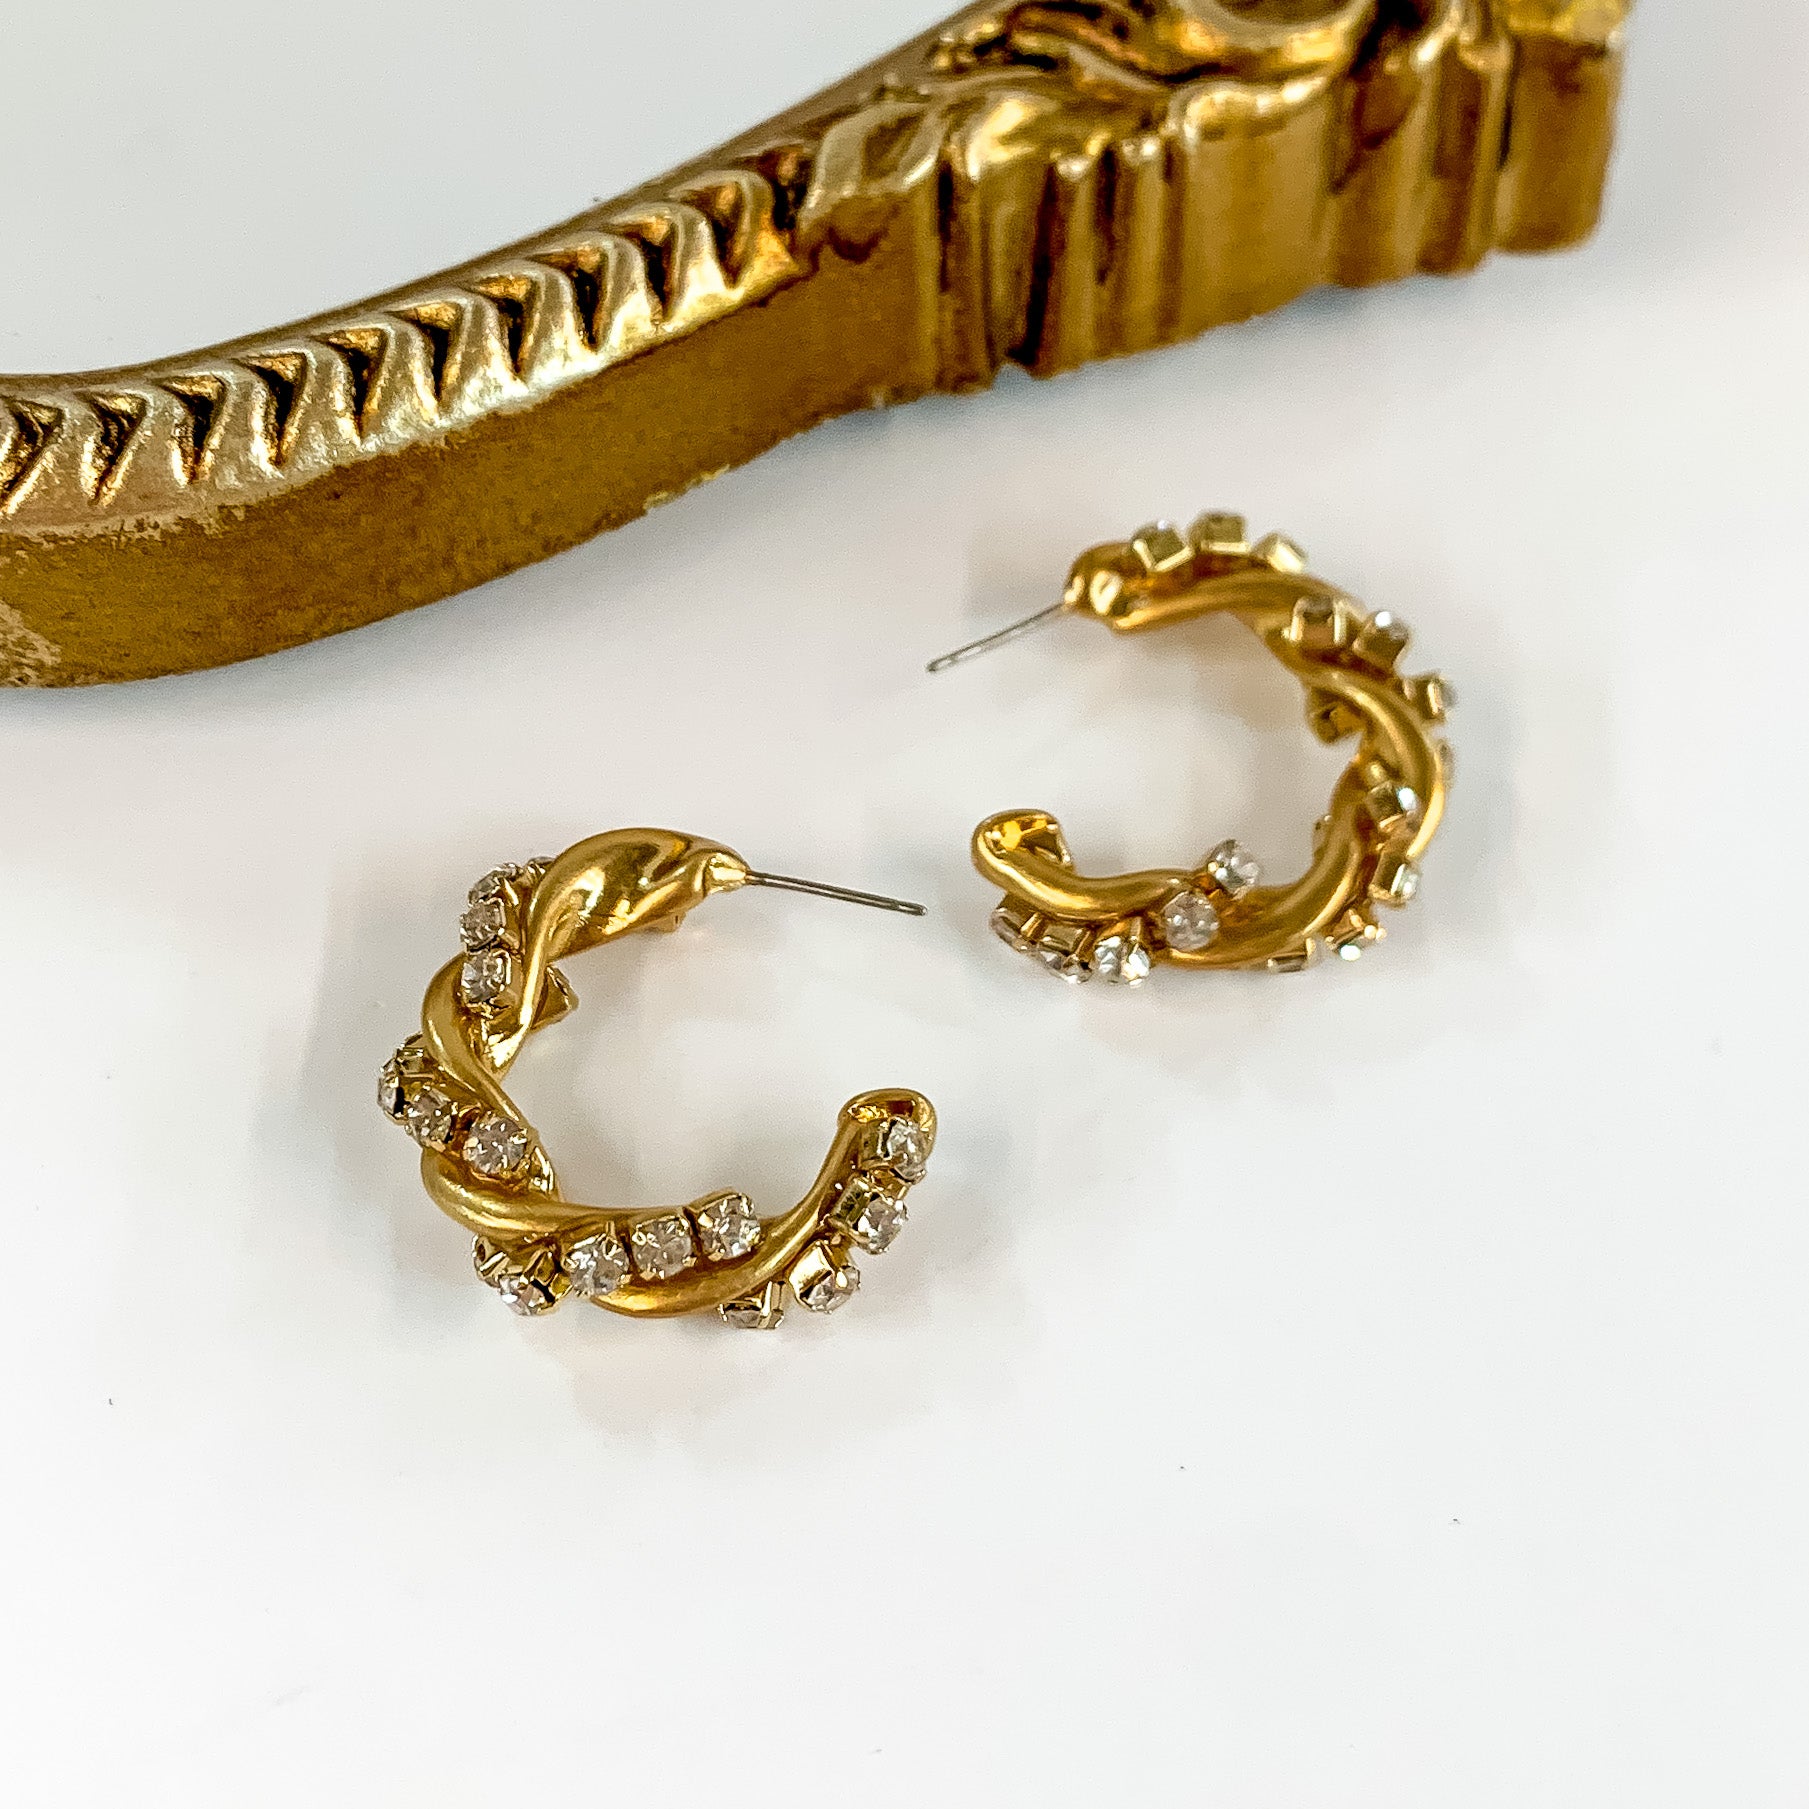 Gold Tone Twisted Hoop Earrings with Clear Crystals. Pictured on a white background with a gold frame behind the earrings.  